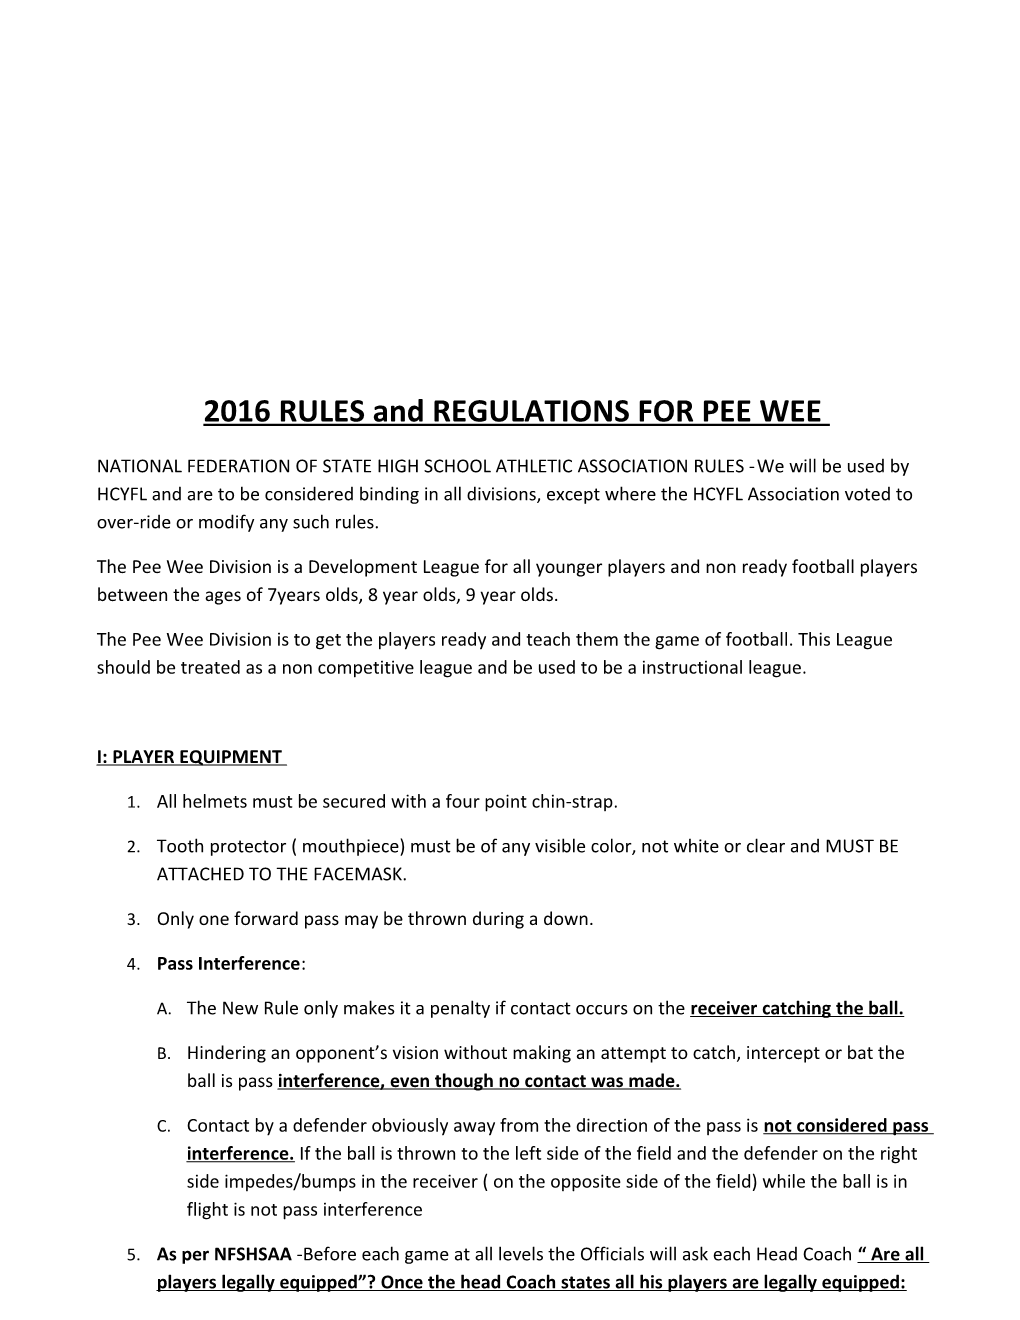 2016 RULES and REGULATIONS for PEE WEE